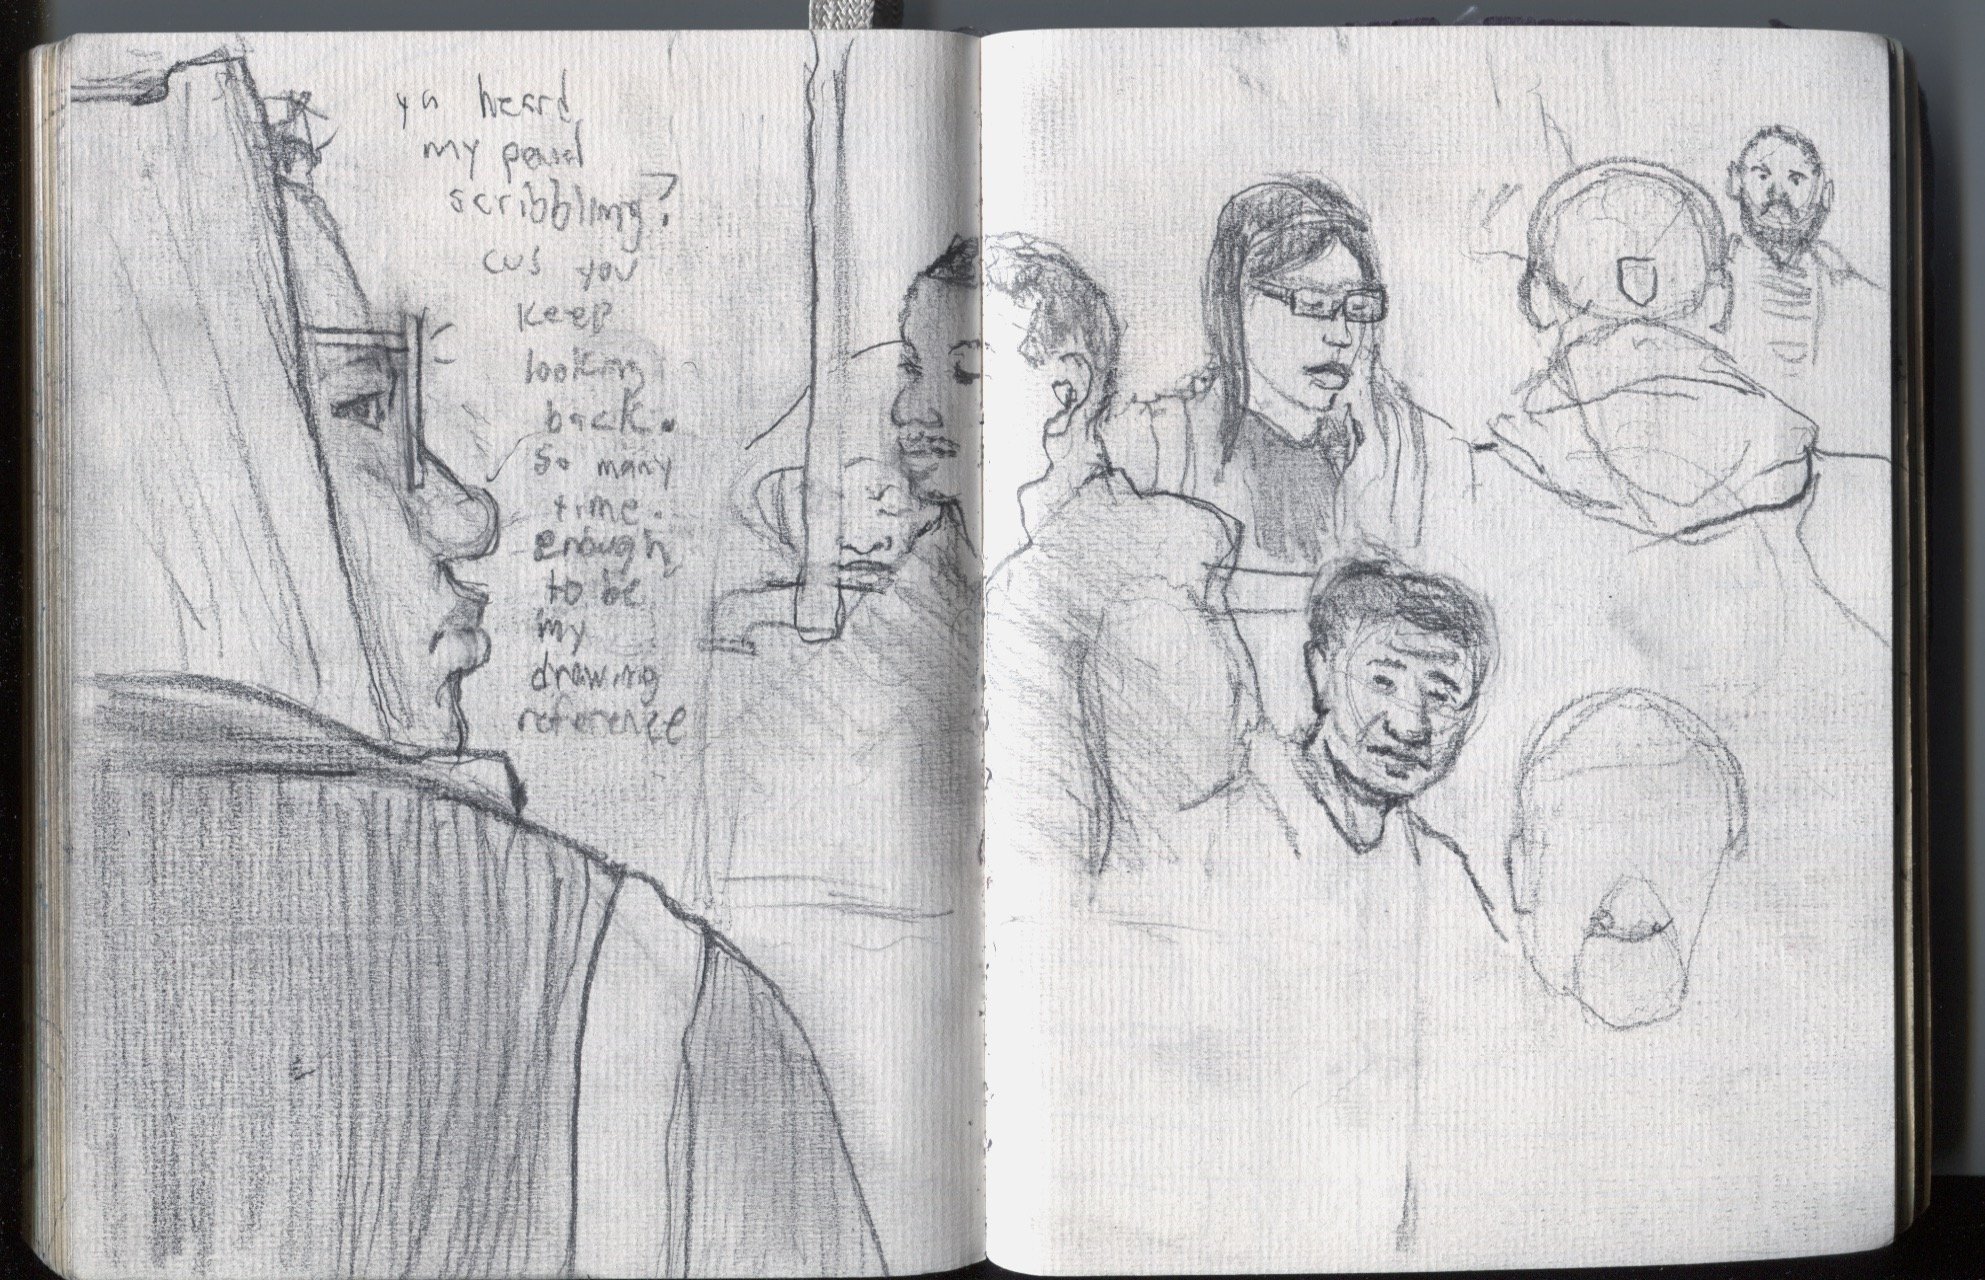   Latest Pages from The Sketchbook, 